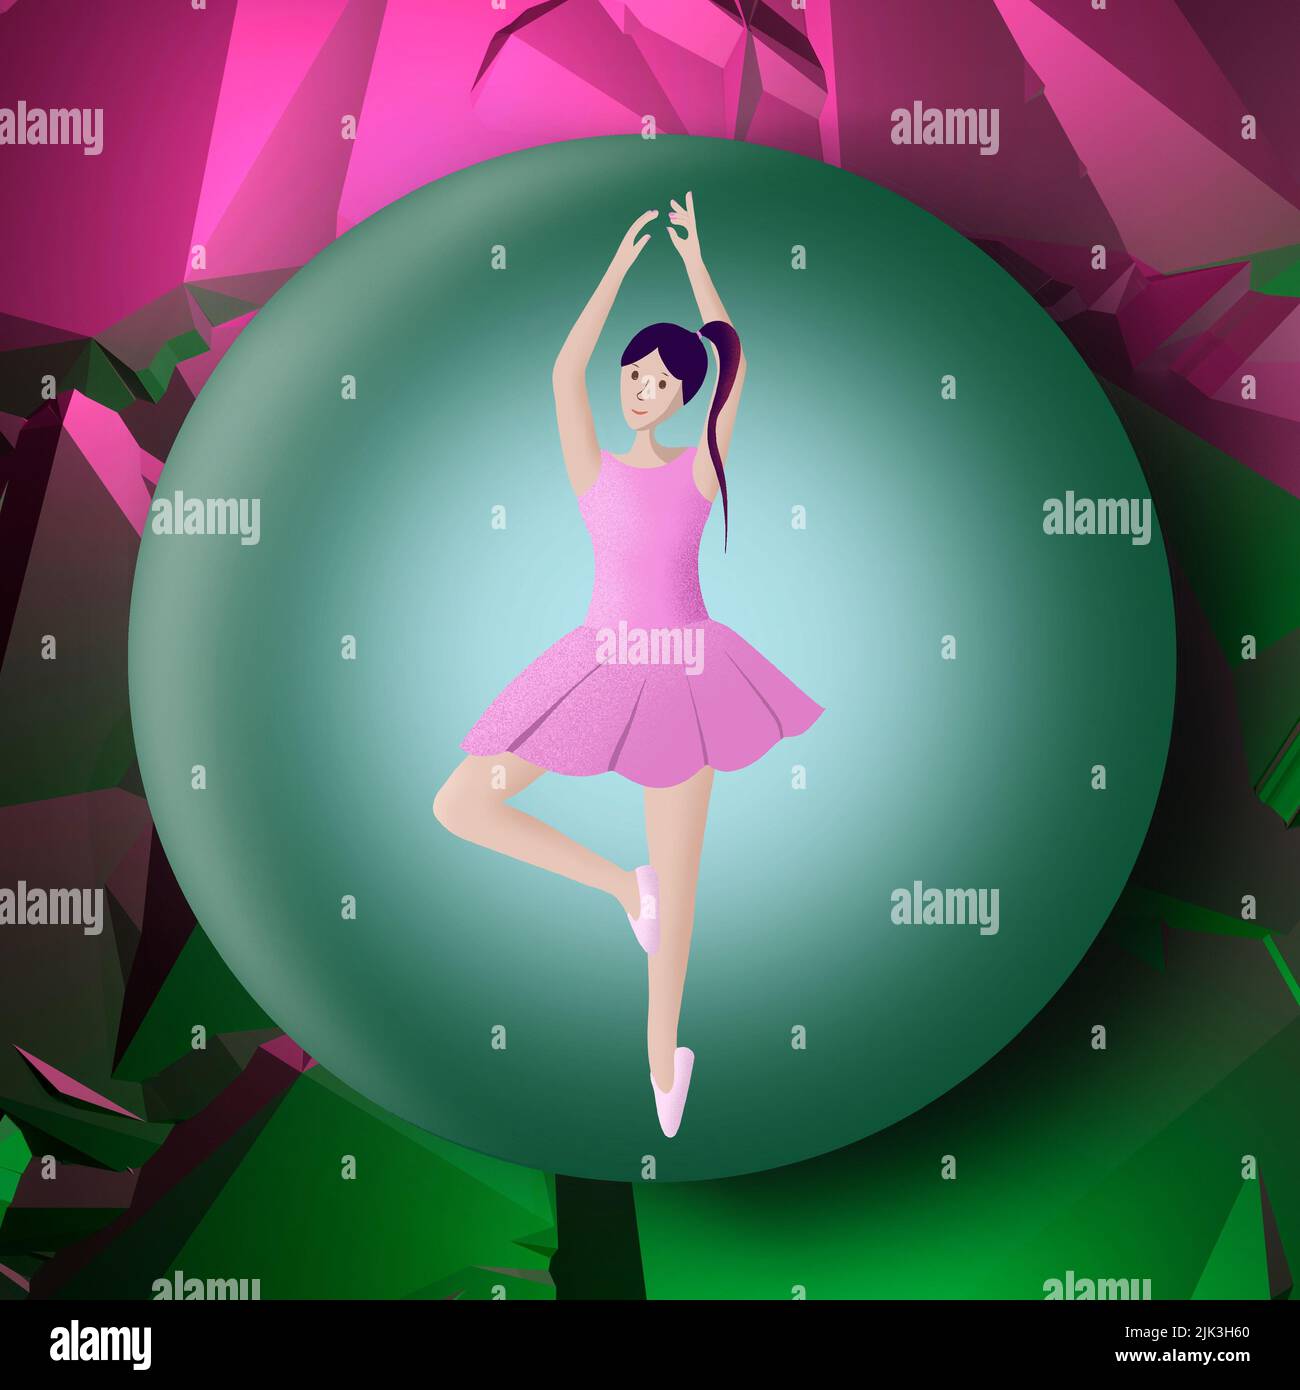 illustration of a girl is performaing a dance figure. Flat drawing of a dancing young female. High quality illustration Stock Photo